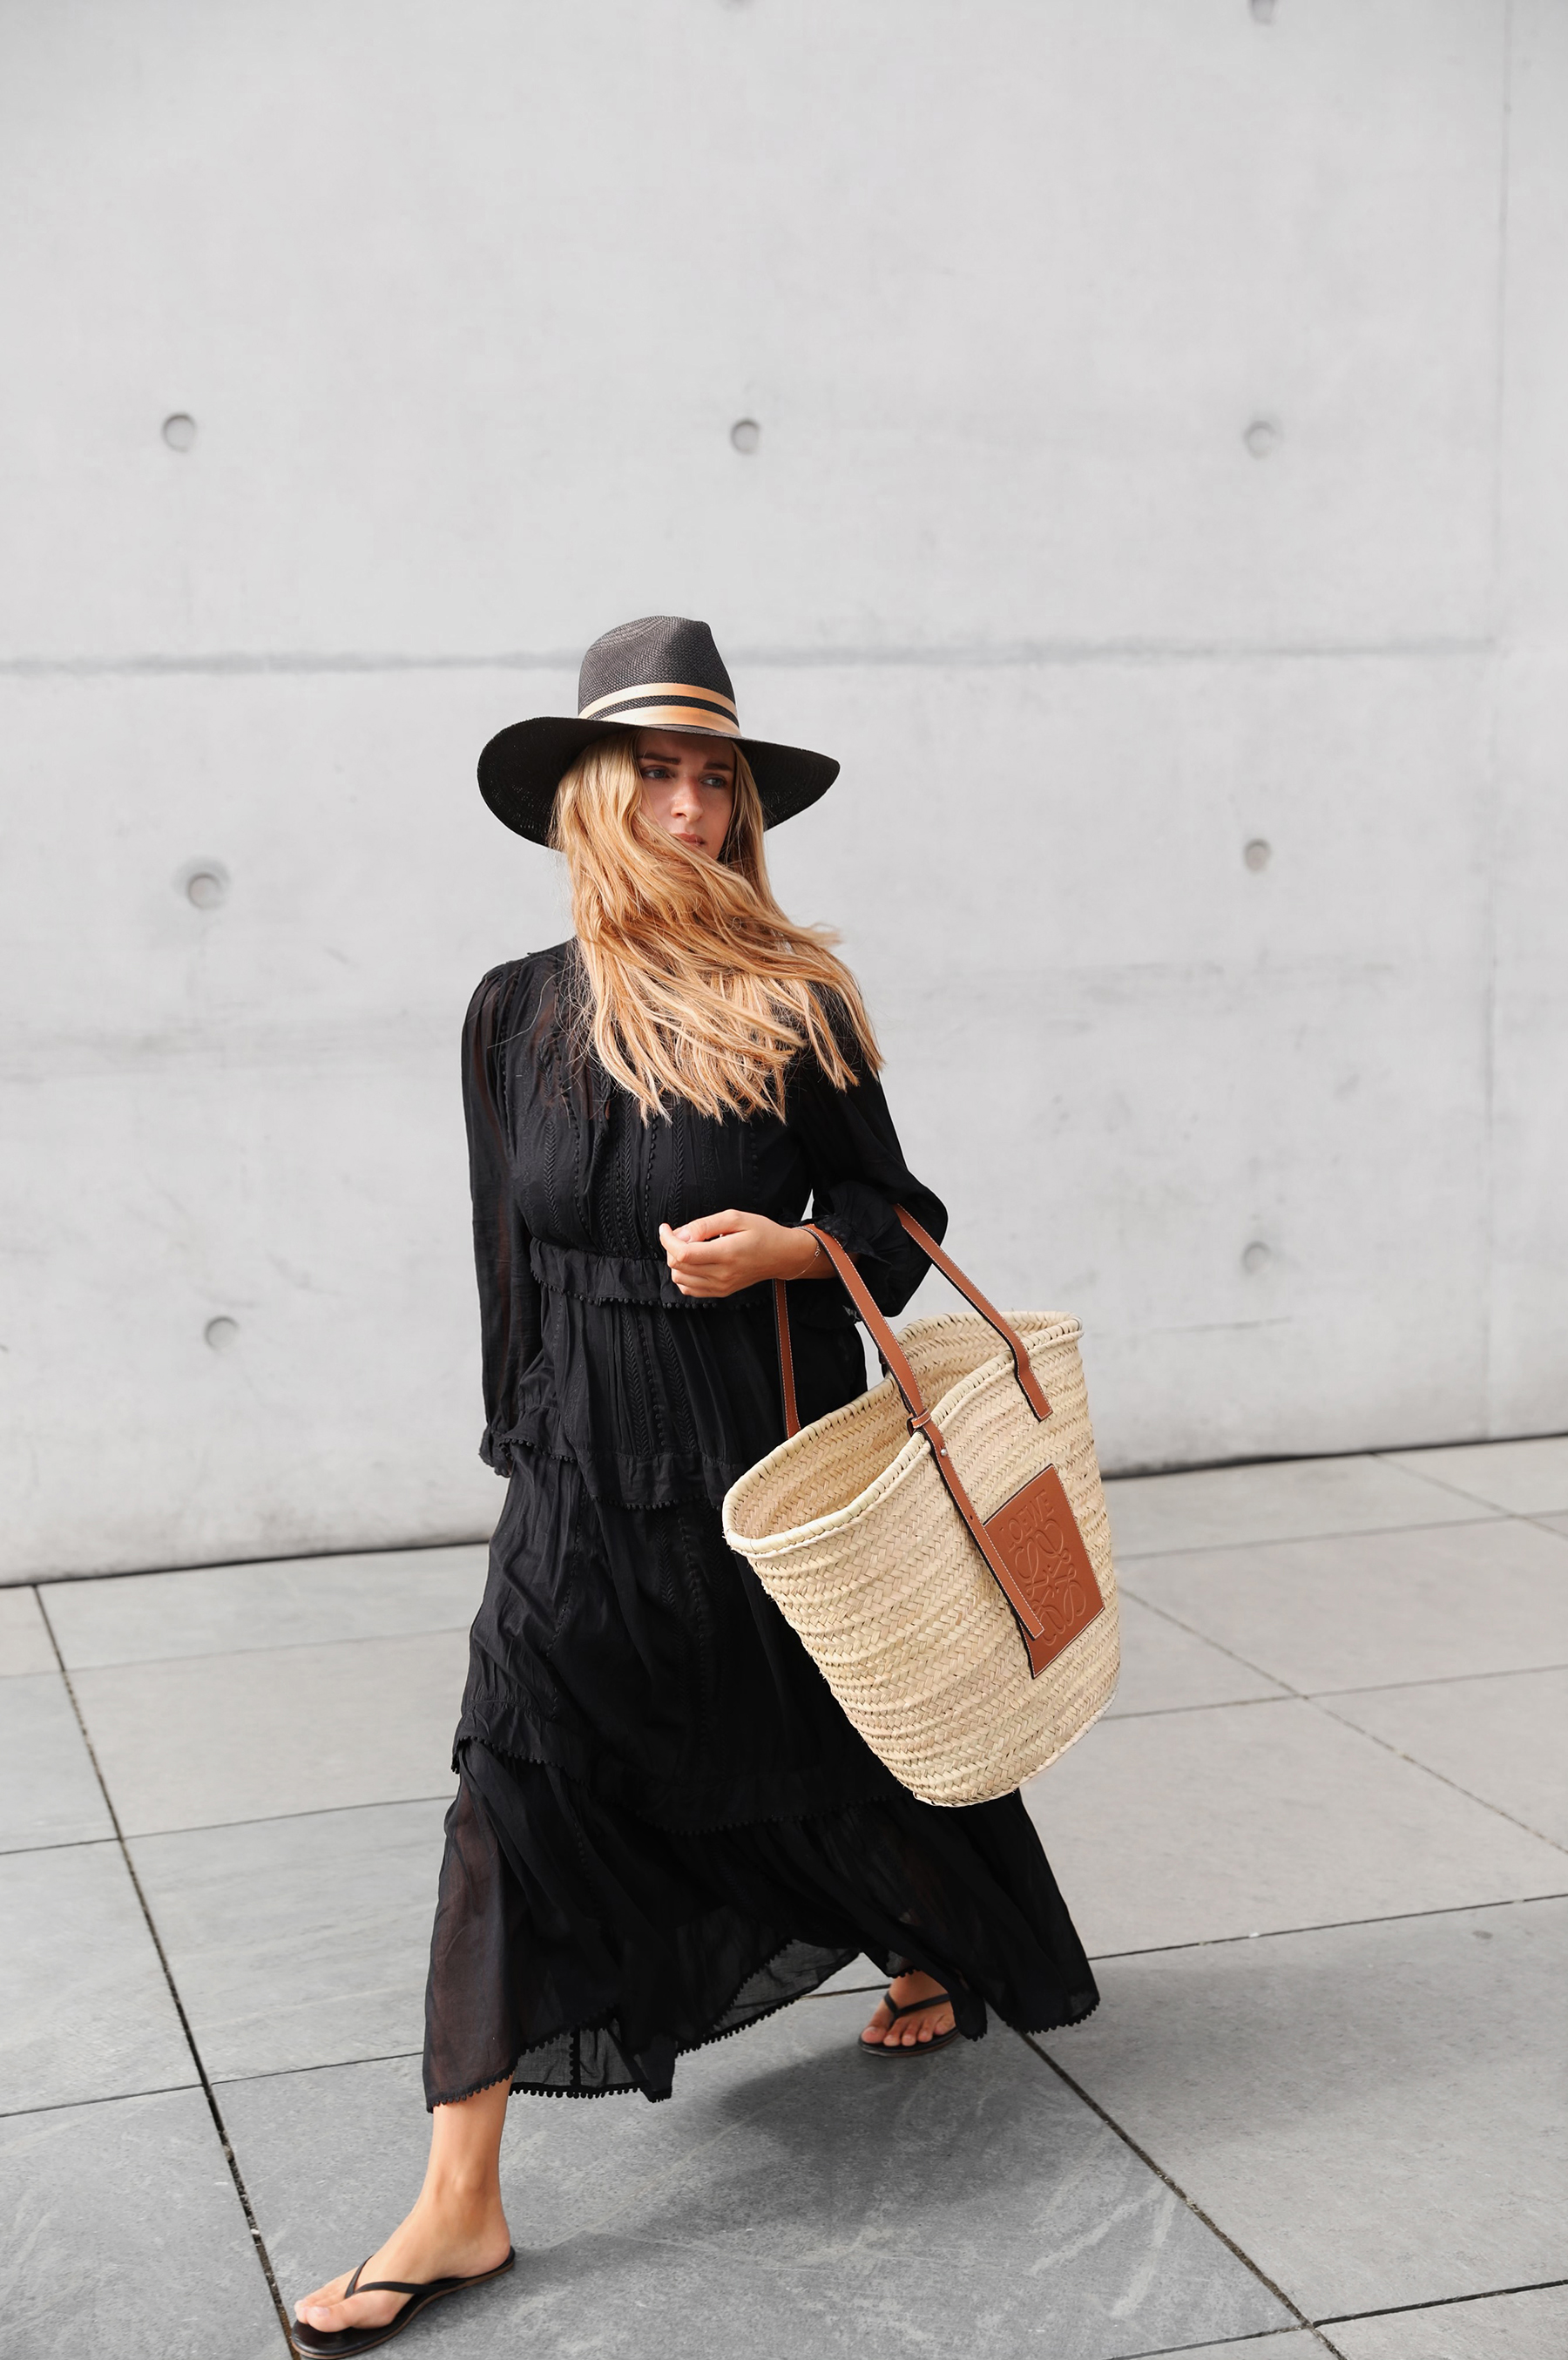 neutral summer outfits Minimal Summer Outfit Ideas Neutral Outfit Ideas Black Long Sleeve Maxi Dress Straw Hat Straw Tote Bag Woven Accessories 